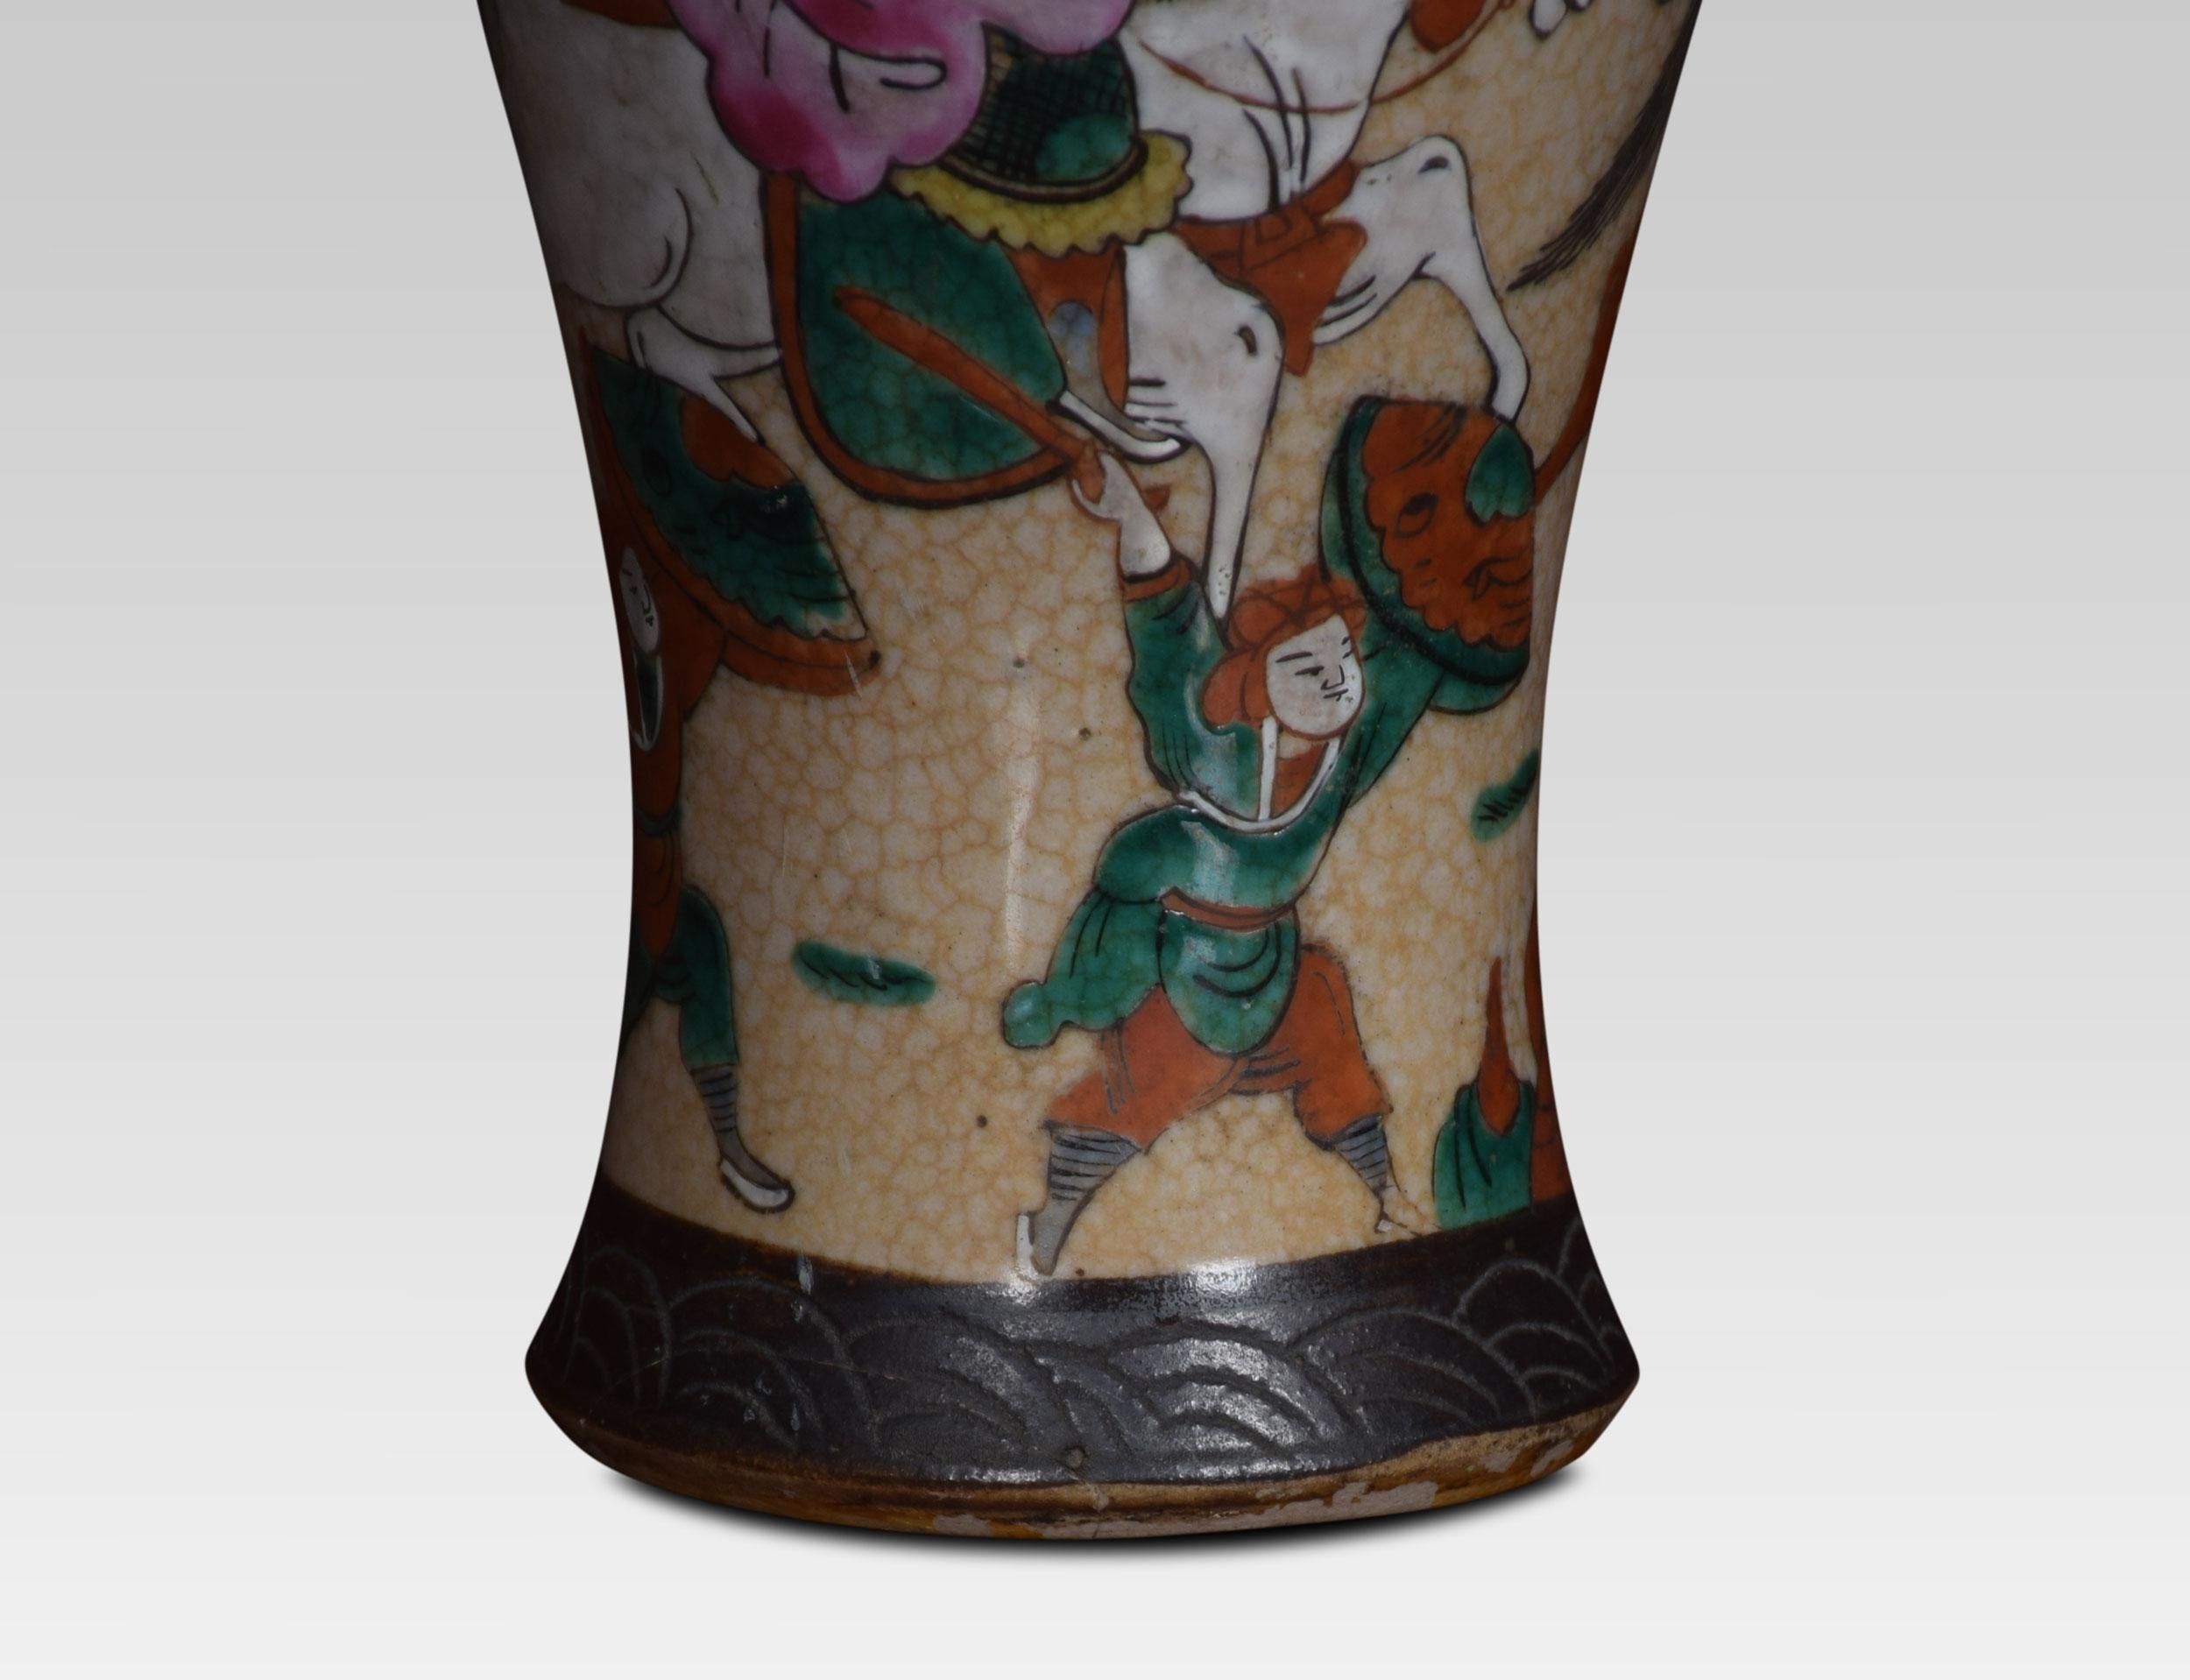 Japanese crackle glaze vase lamp decorated with a battle scene. The lamp has been rewired and tested.
Dimensions:
Height 13.5 inches
Width 4.5 inches
Depth 4.5 inches.